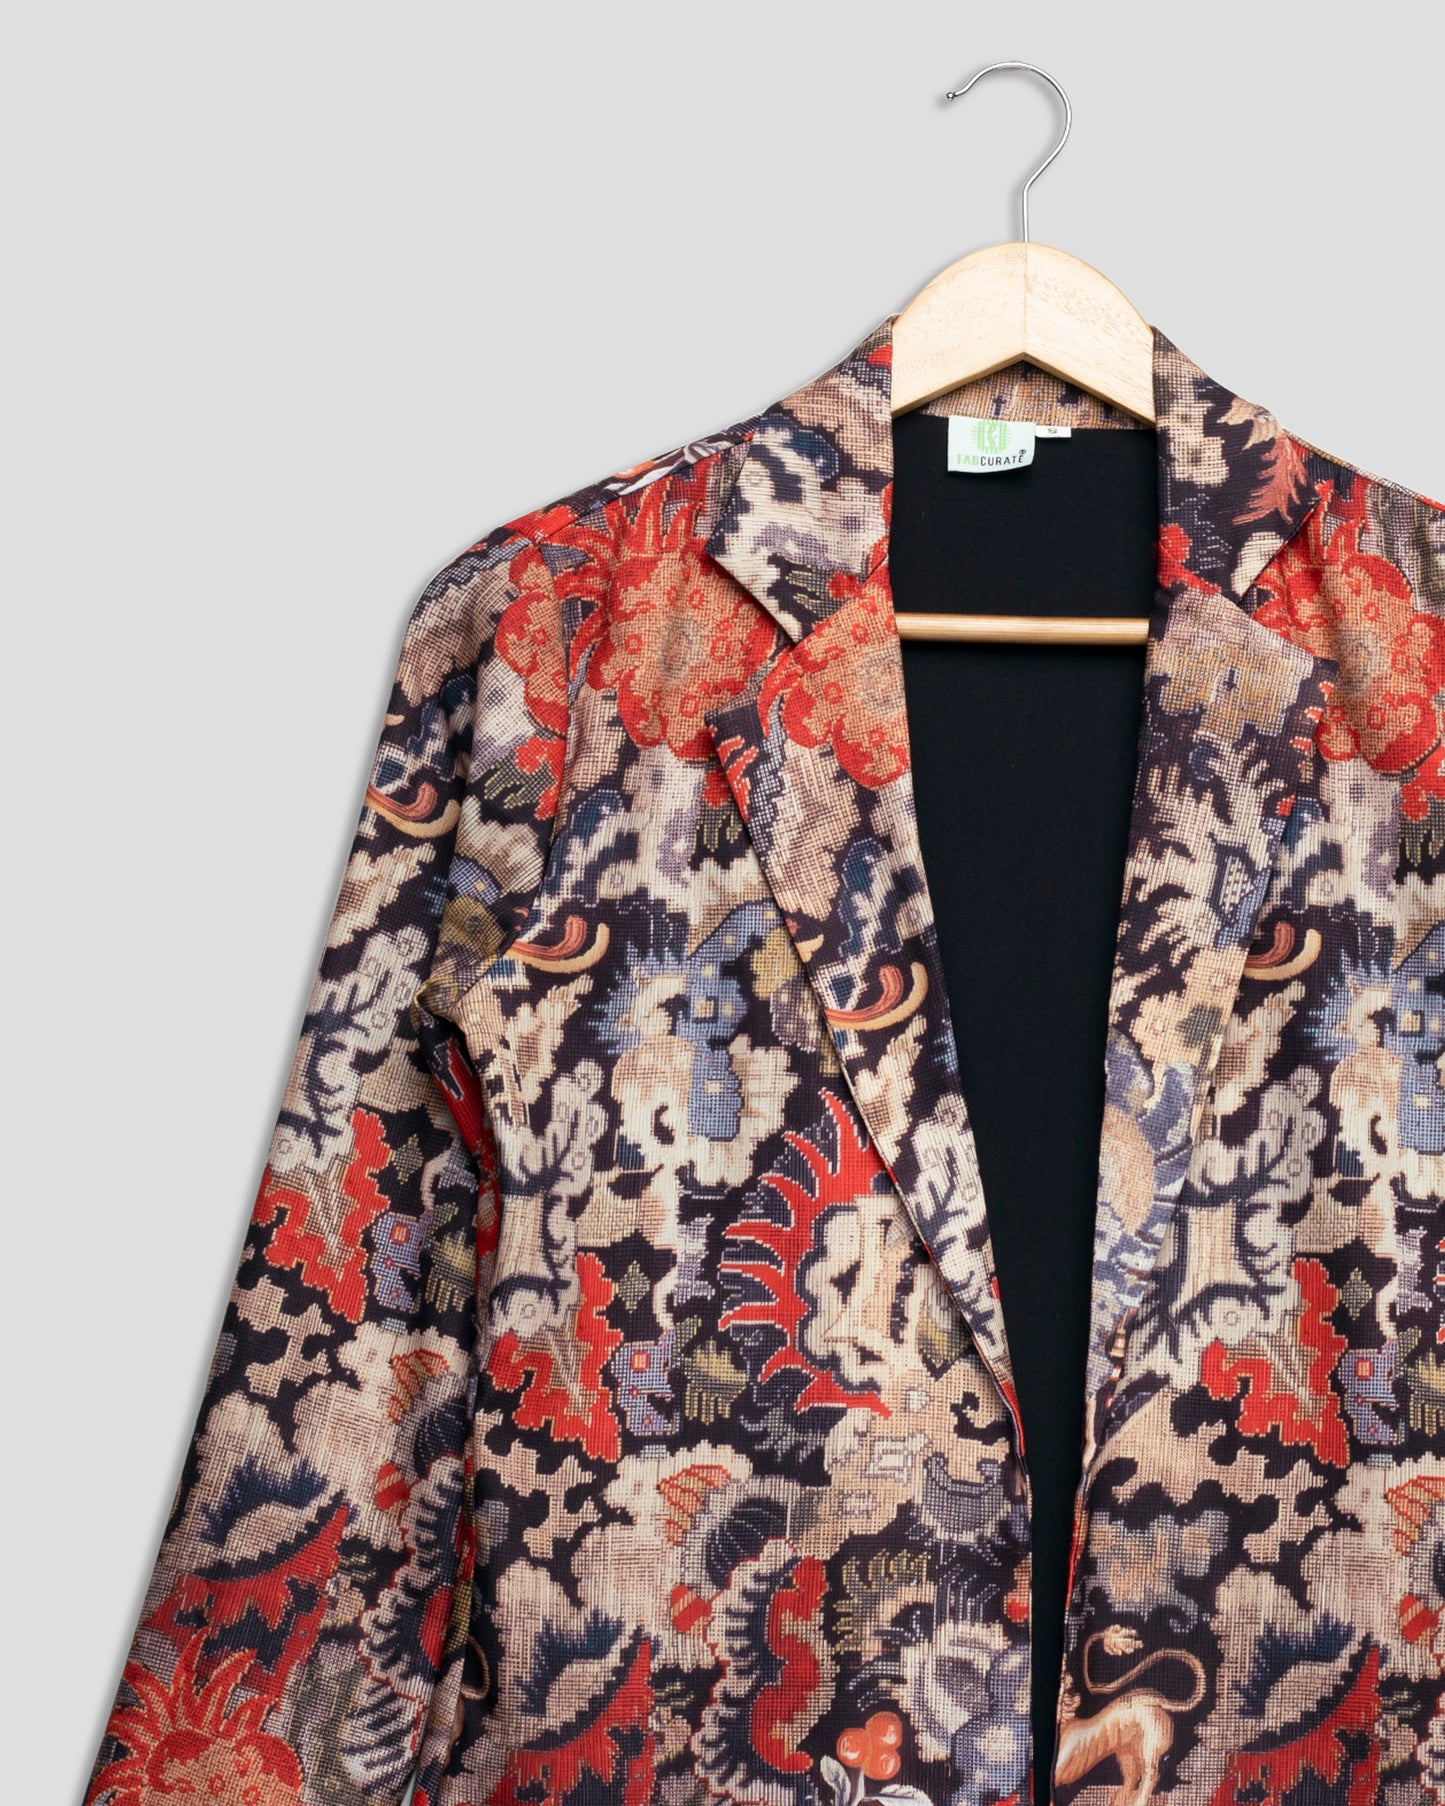 Stylish Women's Jacket For Every Occasion